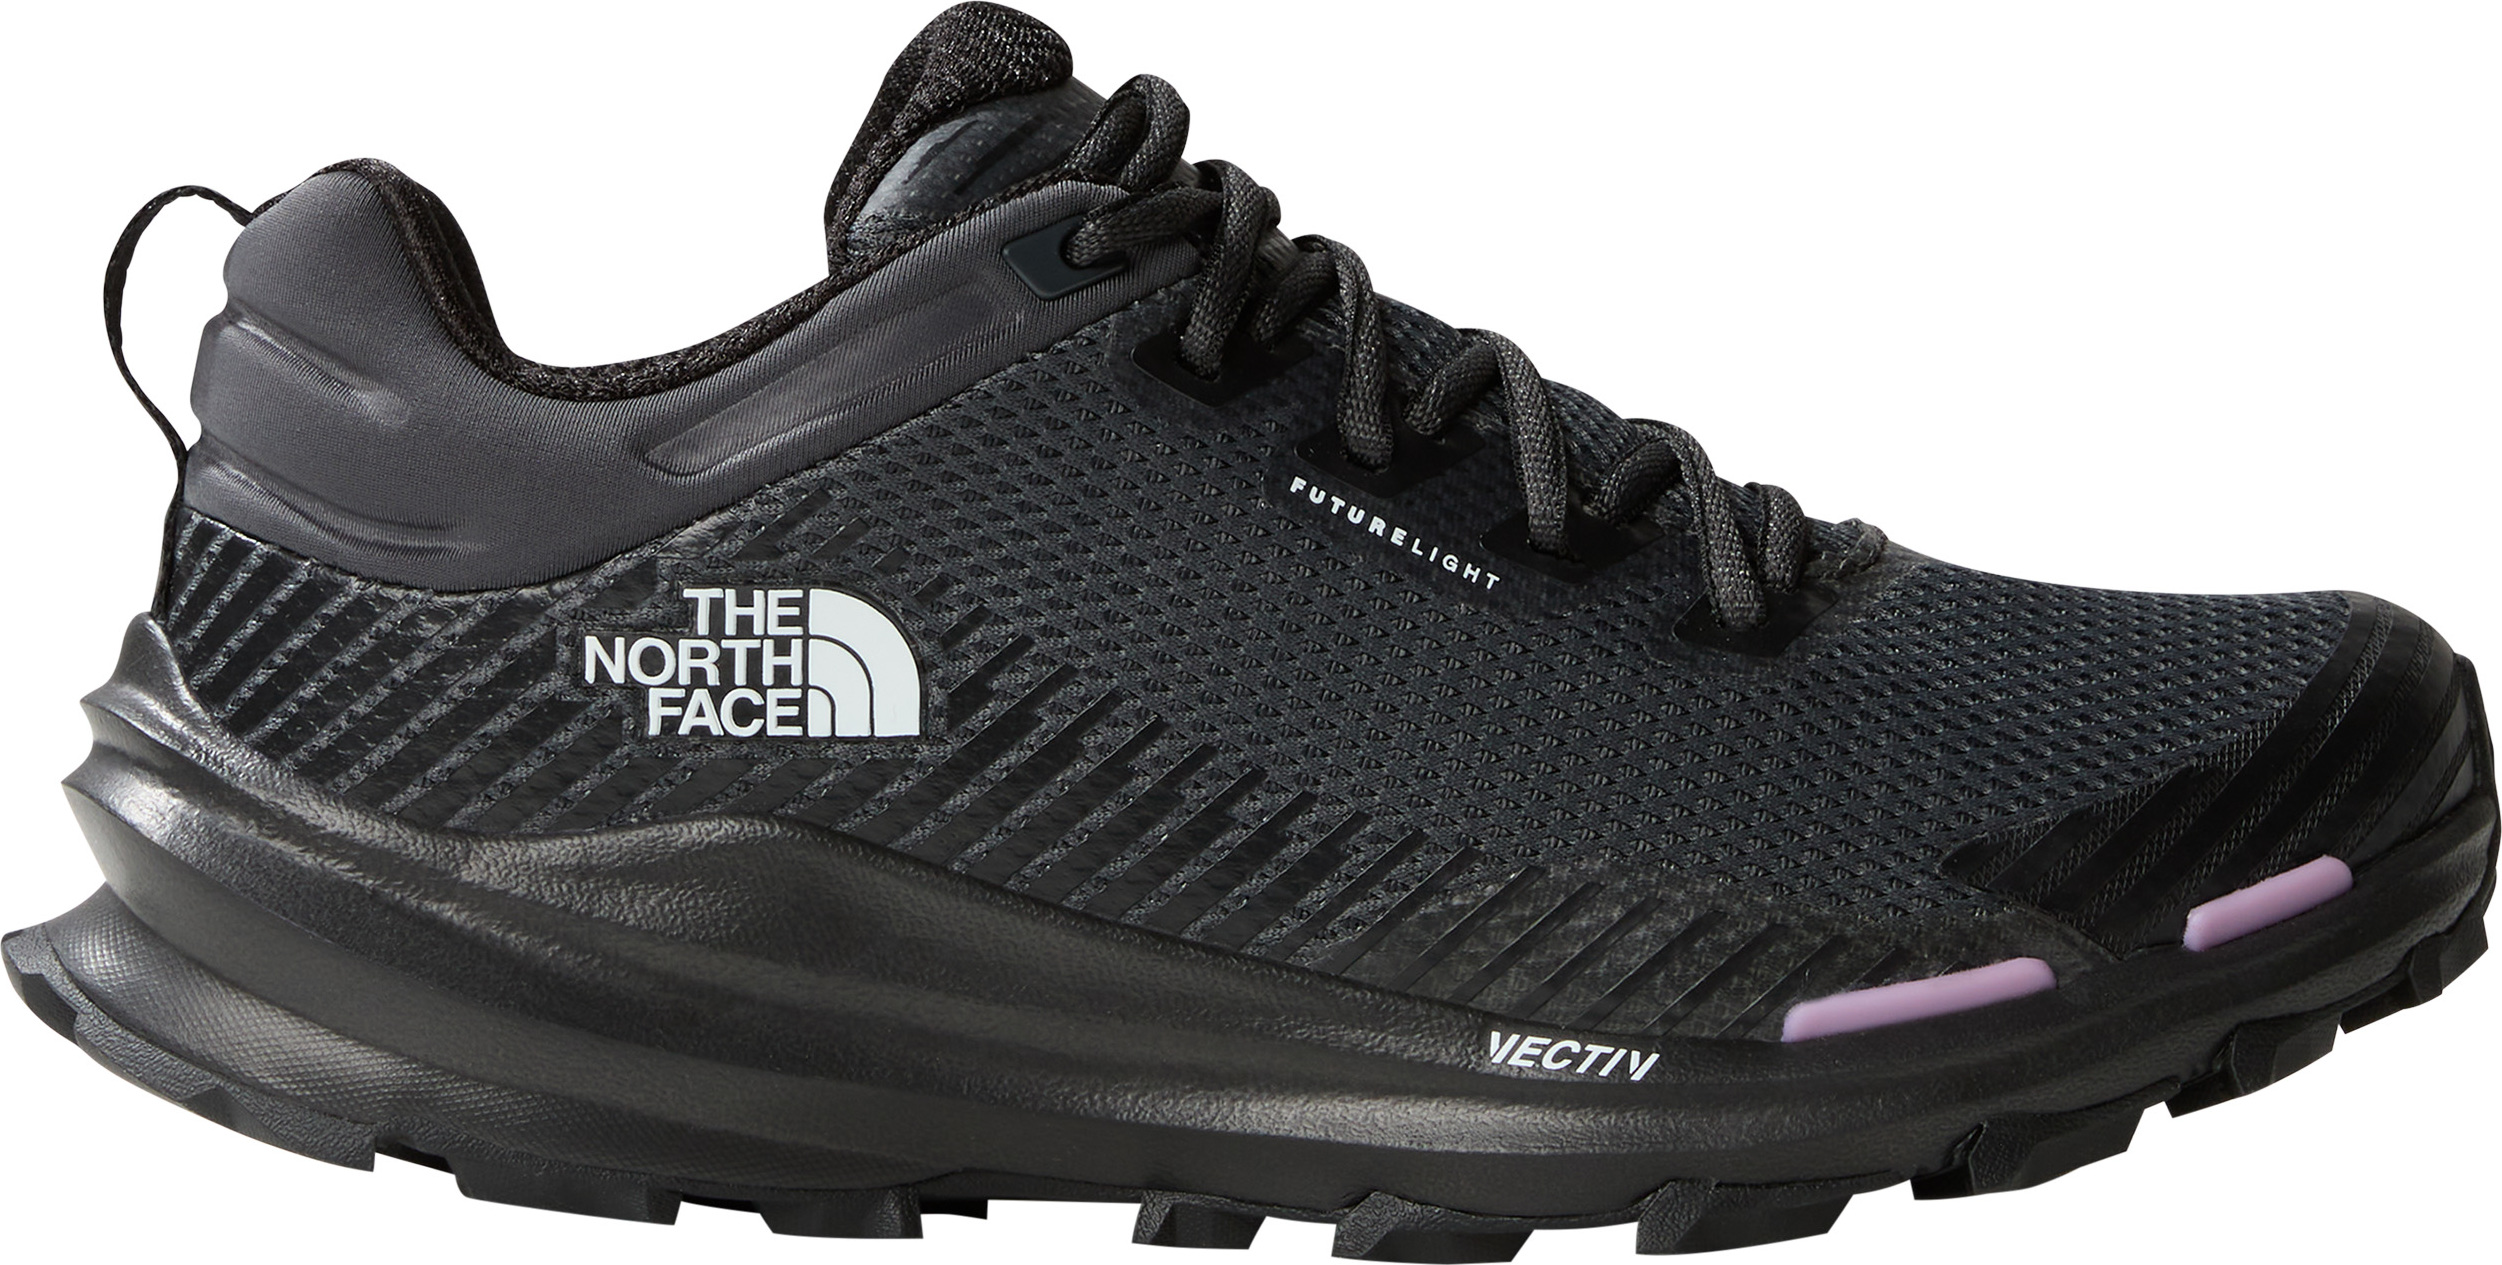 The North Face Women's Vectiv Fastpack Futurelight Tnf Black/Asphalt Grey 37, Tnf Black/Asphalt Grey